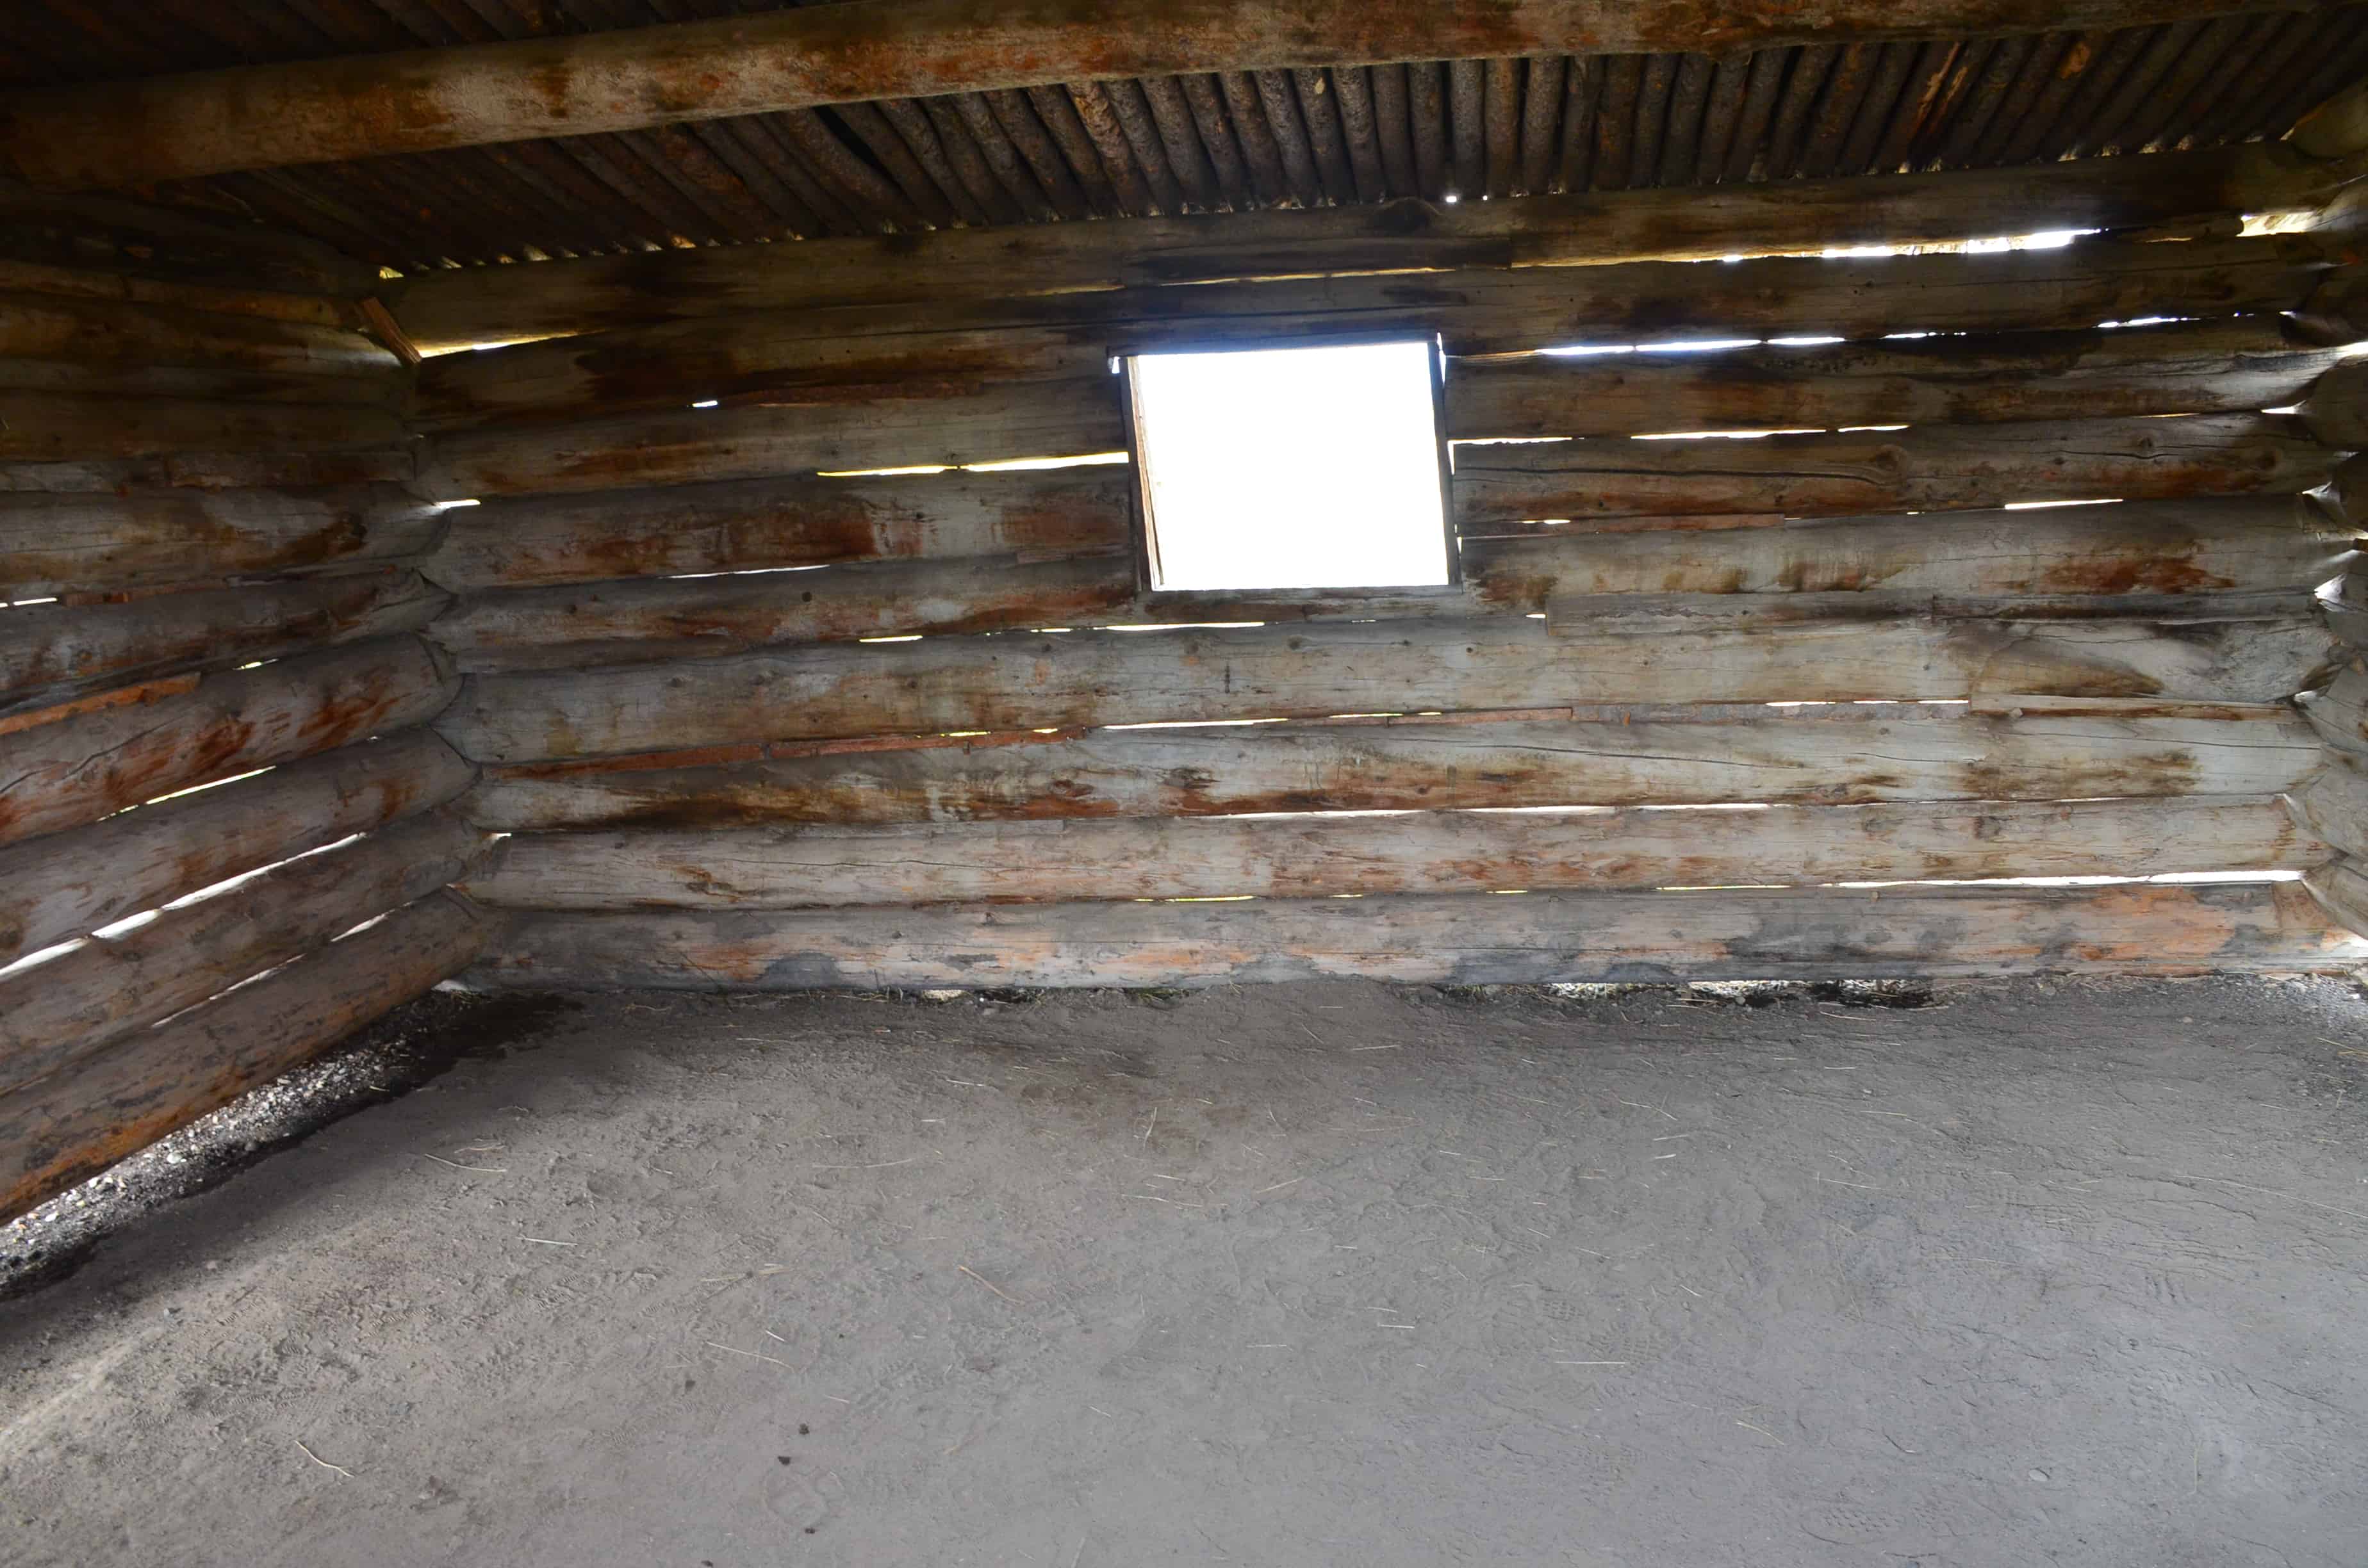 Cunningham Cabin Historic Site on Highway 89 in Grand Teton National Park, Wyoming